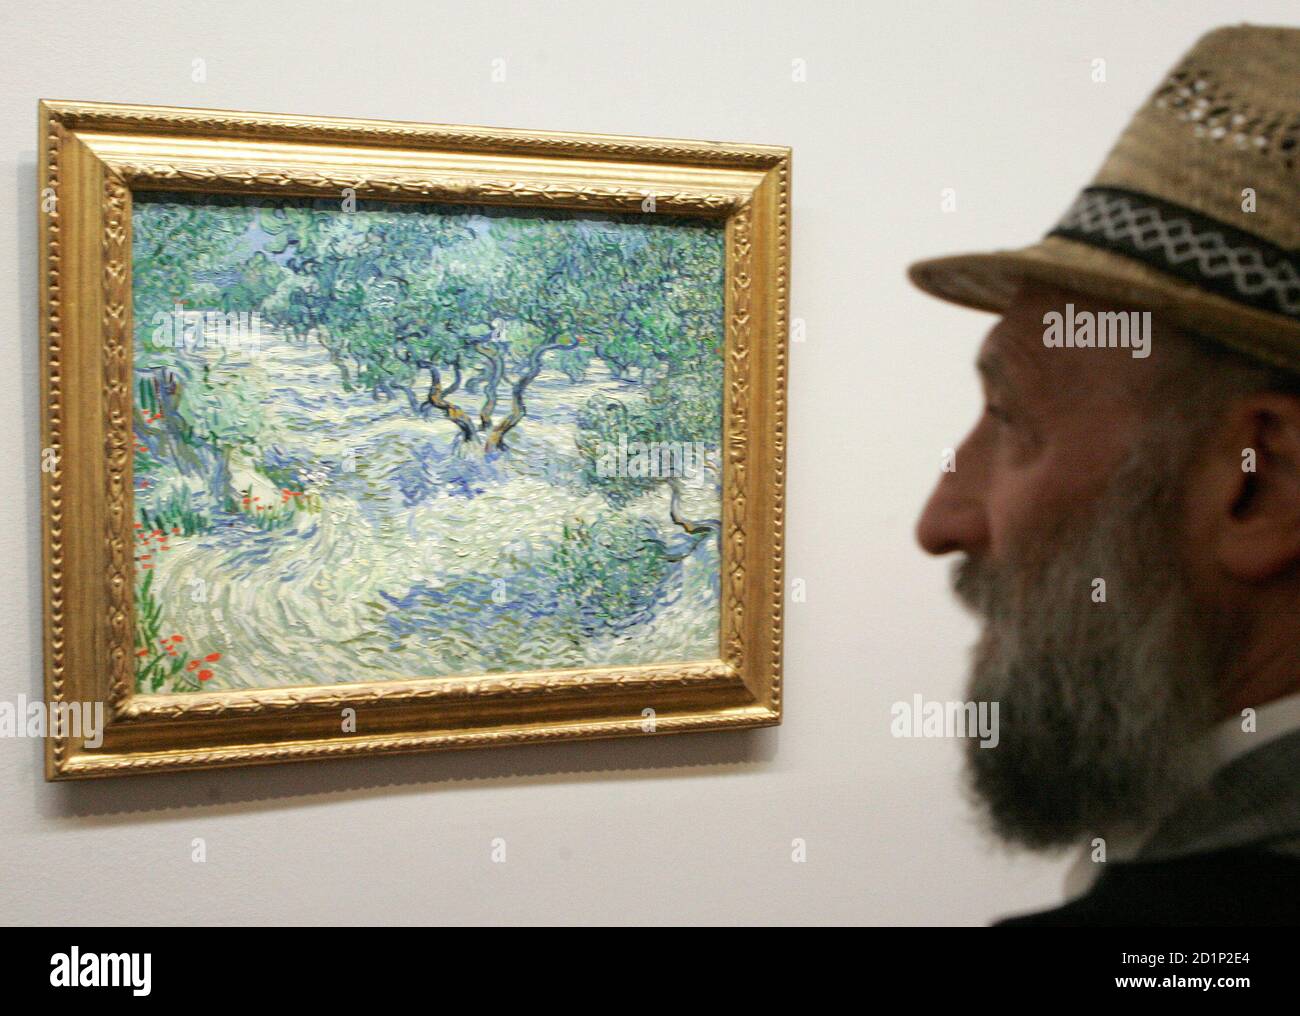 A visitor looks at a the painting "Olive Orchard" by Vincent Van Gogh  during the opening of an exhibition at the Albertina Museum in Vienna  September 3, 2008. REUTERS/Herwig Prammer (AUSTRIA Stock